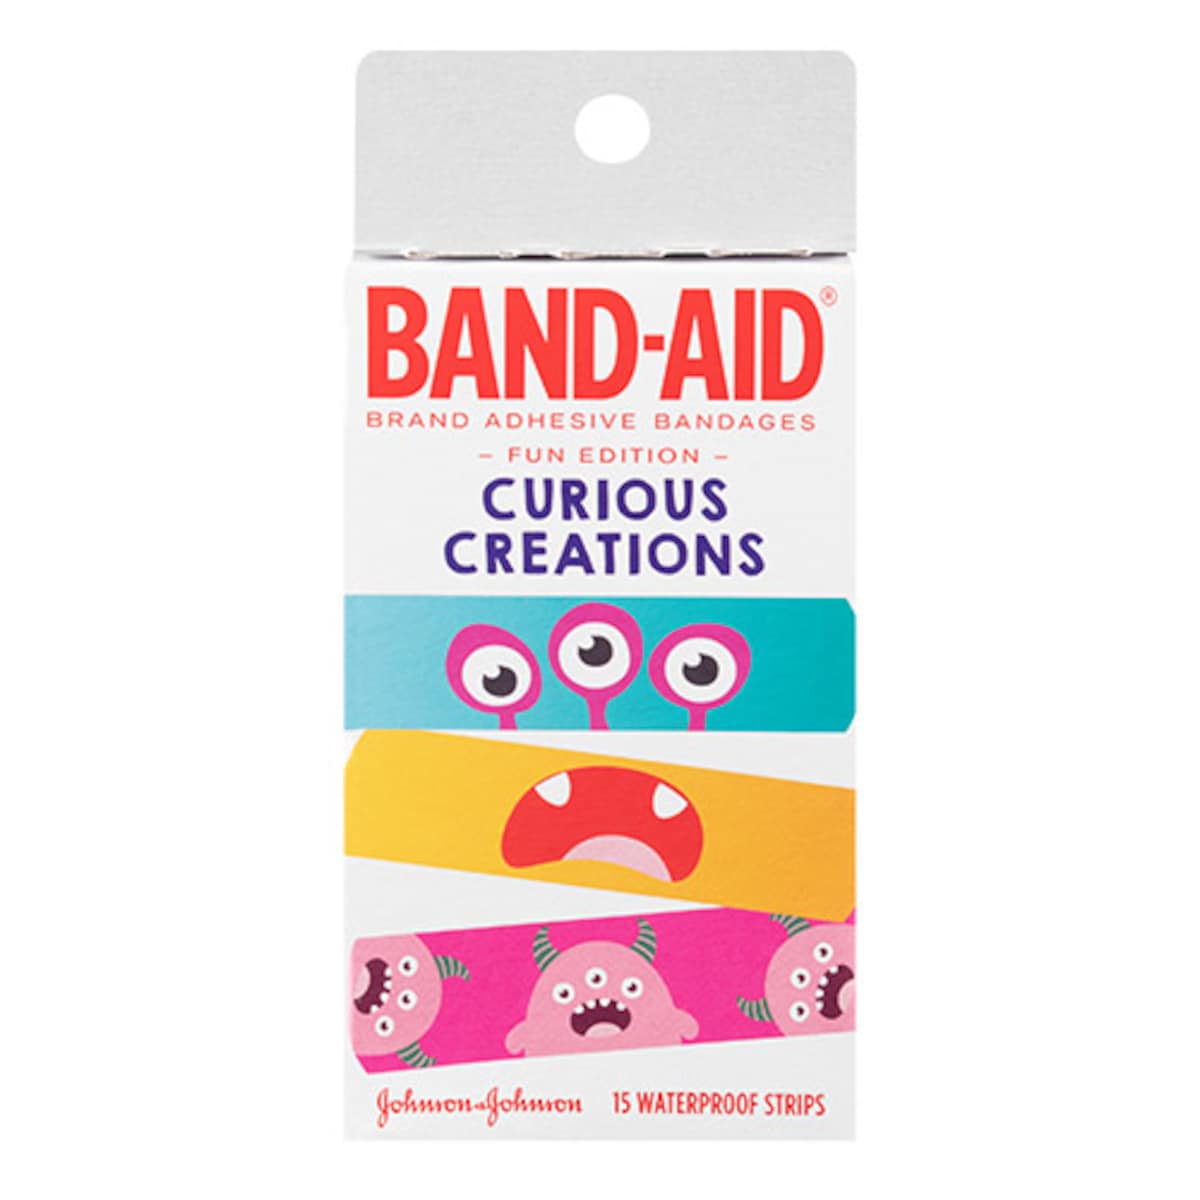 Band-Aid Curious Creations 15 Waterproof Strips